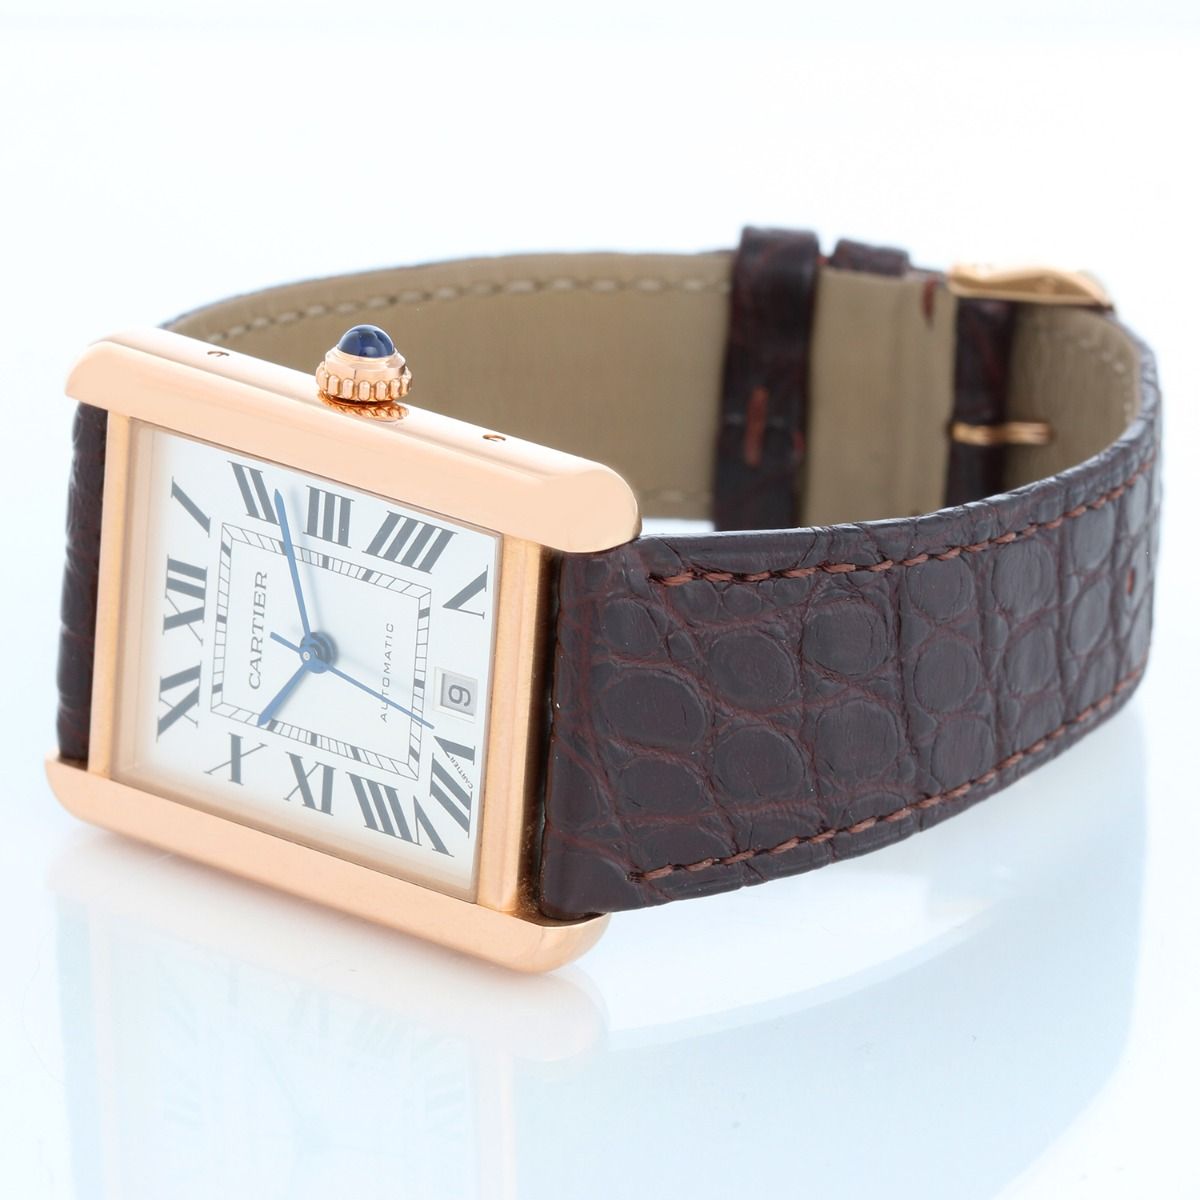 Review: Cartier Tank Solo XL in 18k Rose Gold 